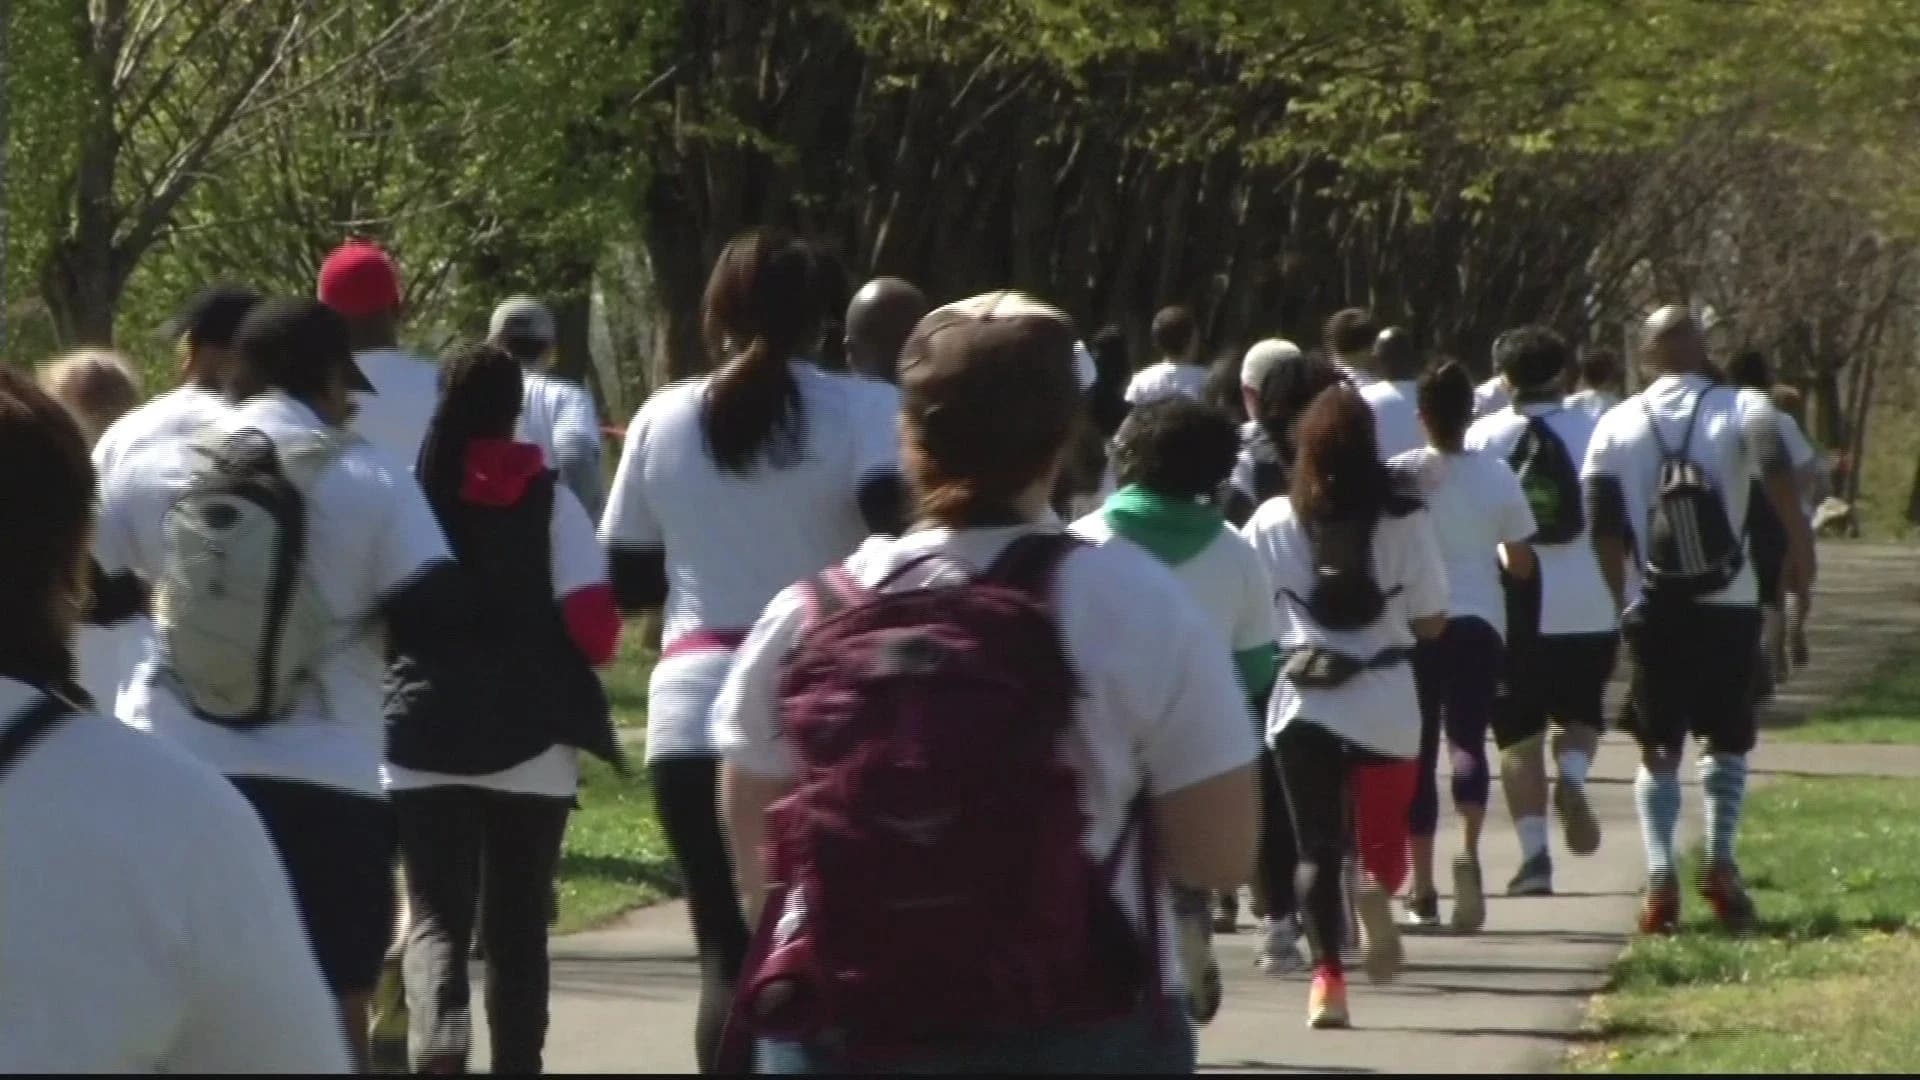 5K aims to help people recently released from prison